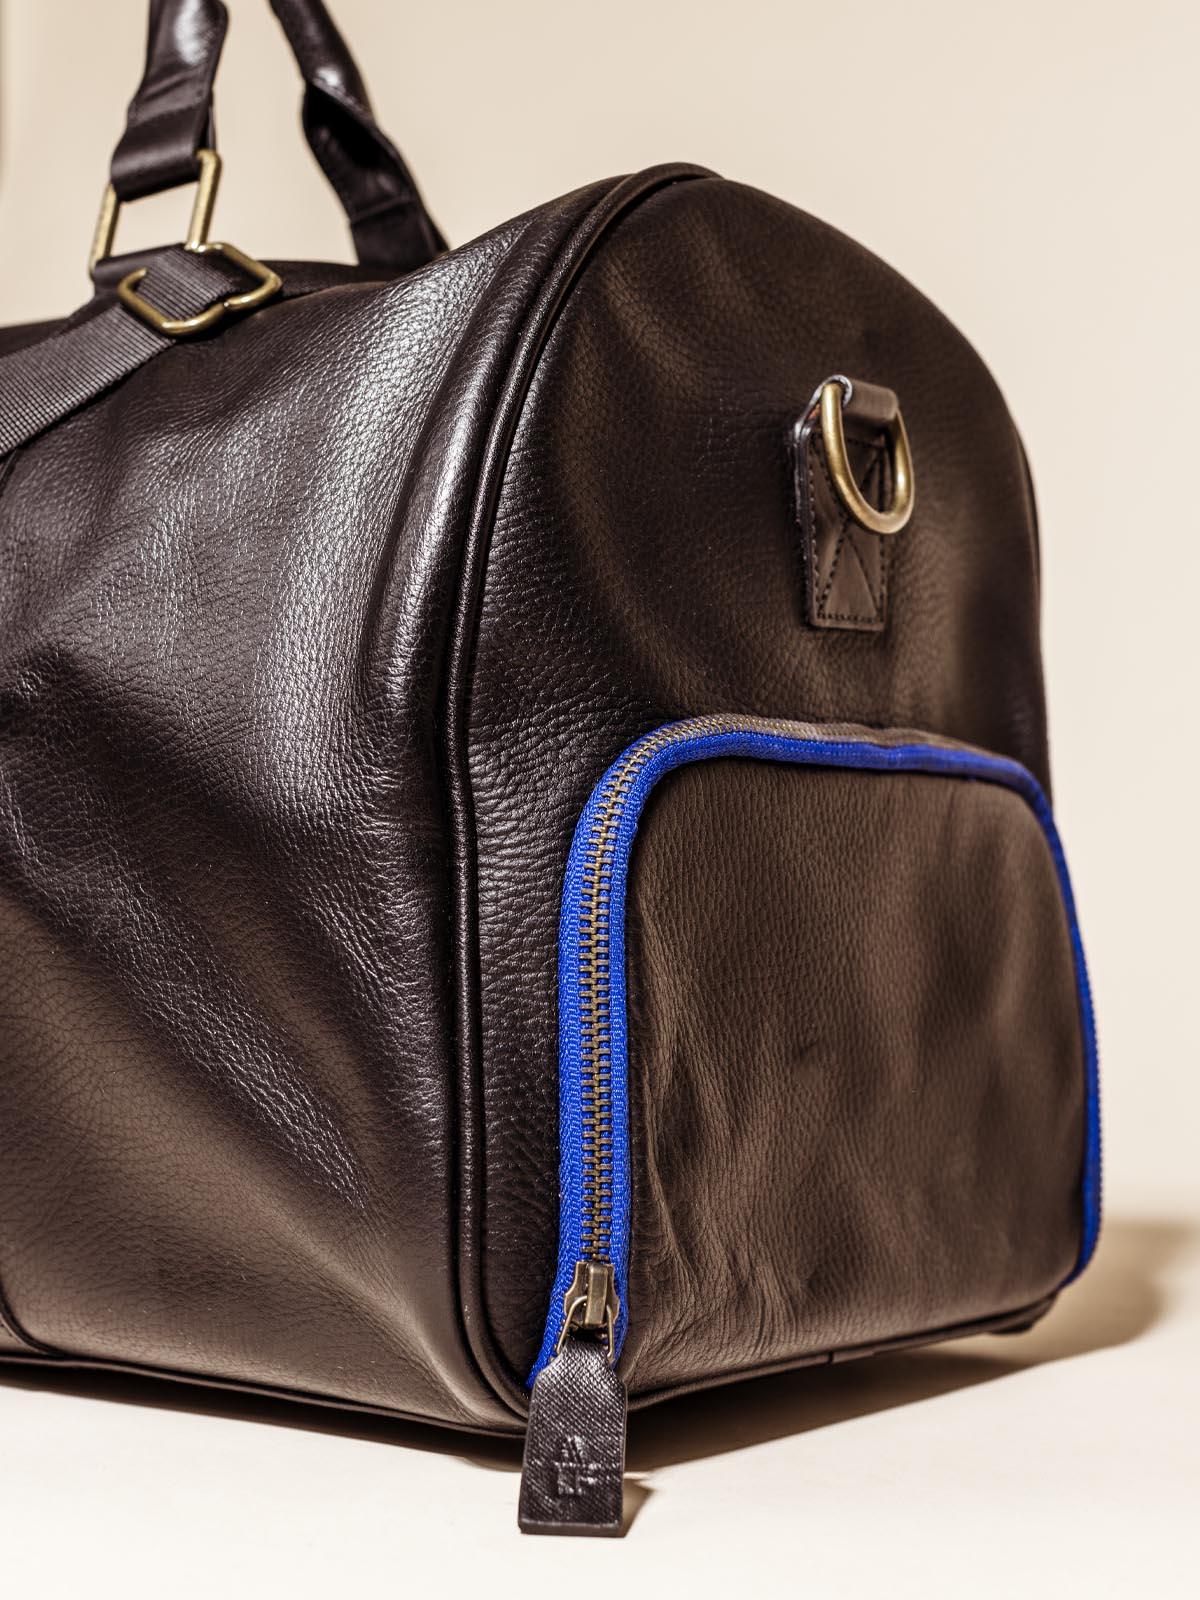 Close Up of the side of the Black Leather Duffle Bag on an off white backdrop featuring shoulder straps, hand straps, and blue accent zippers